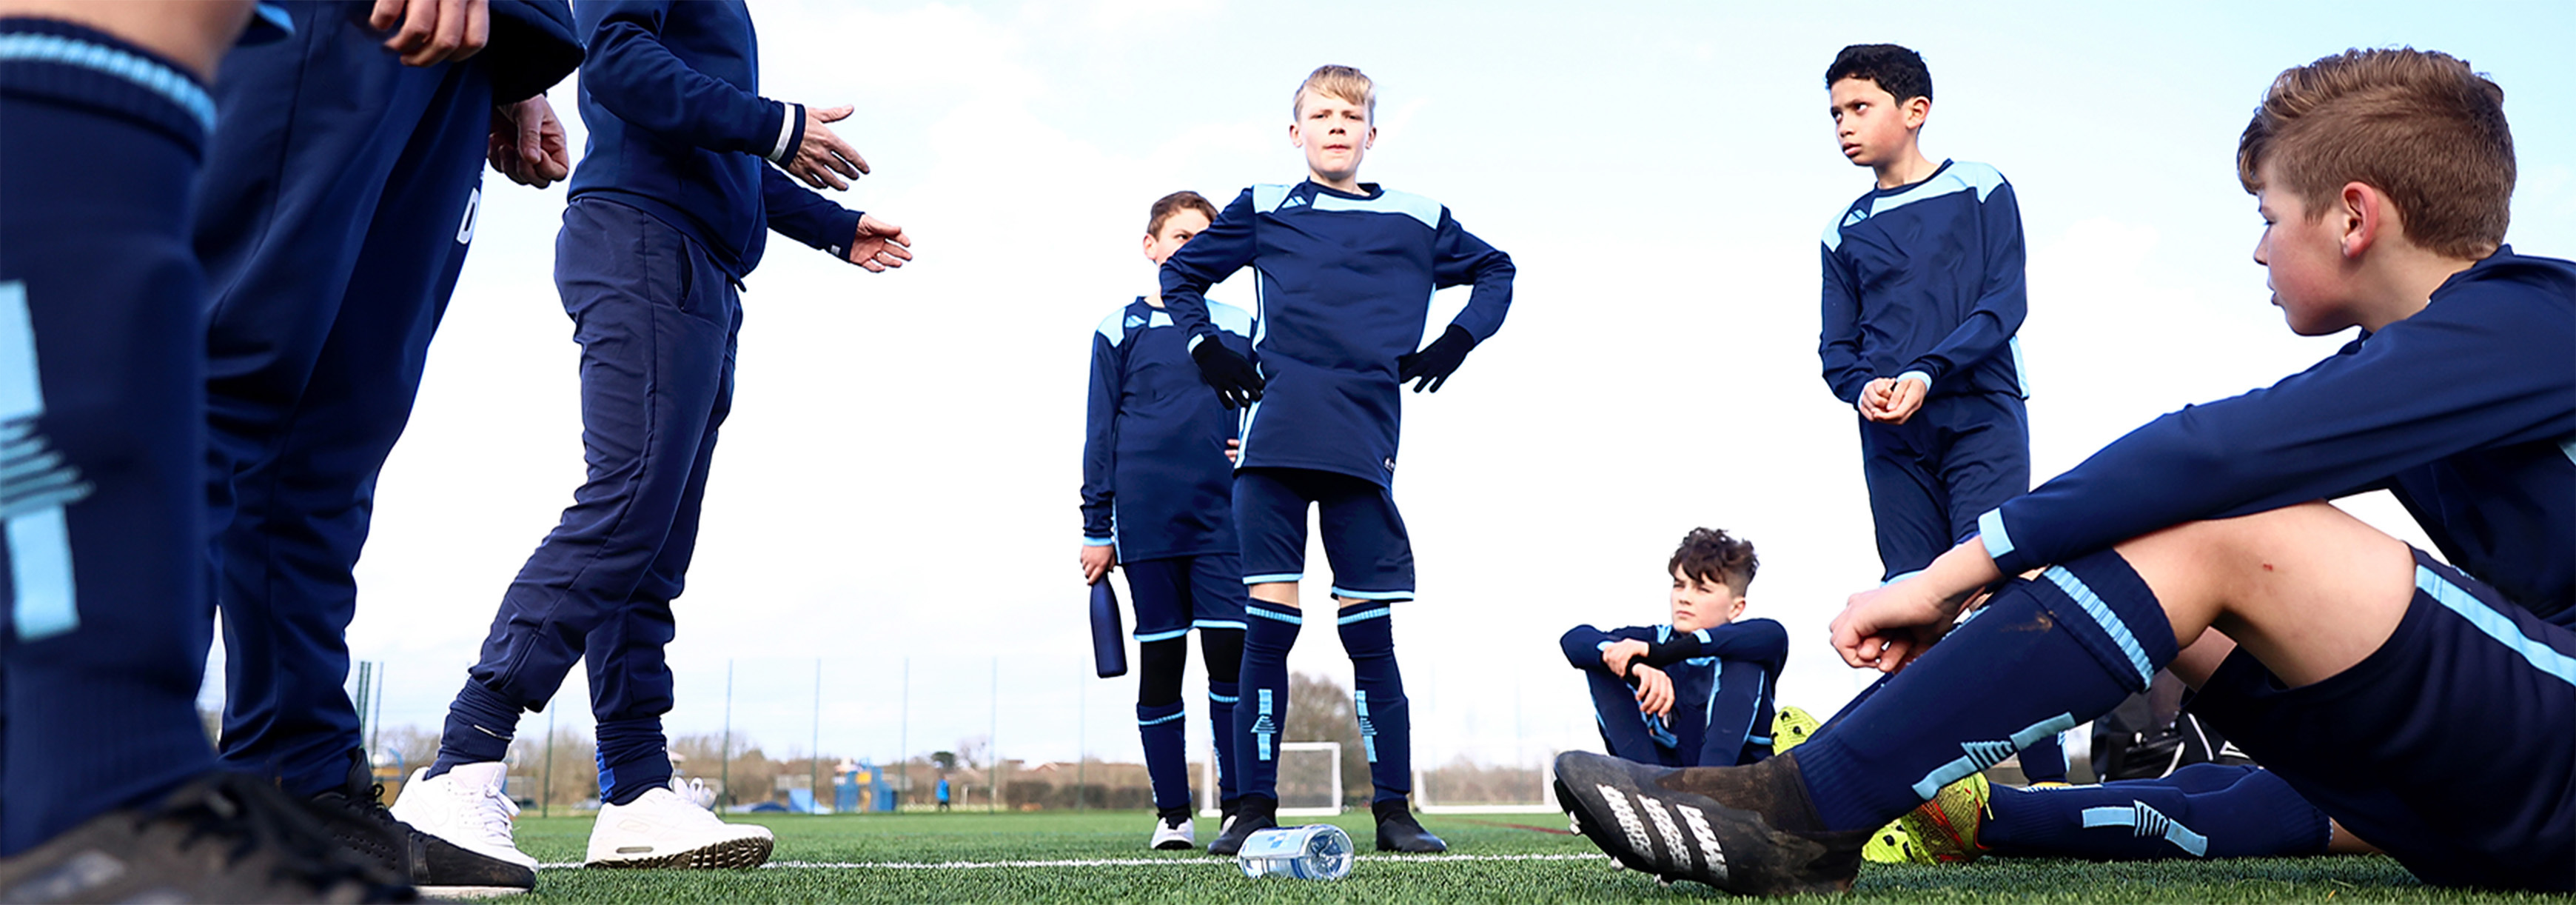 A group of boys listen to their coach at the side of a pitch on matchday. Some are standing while others are sat down.